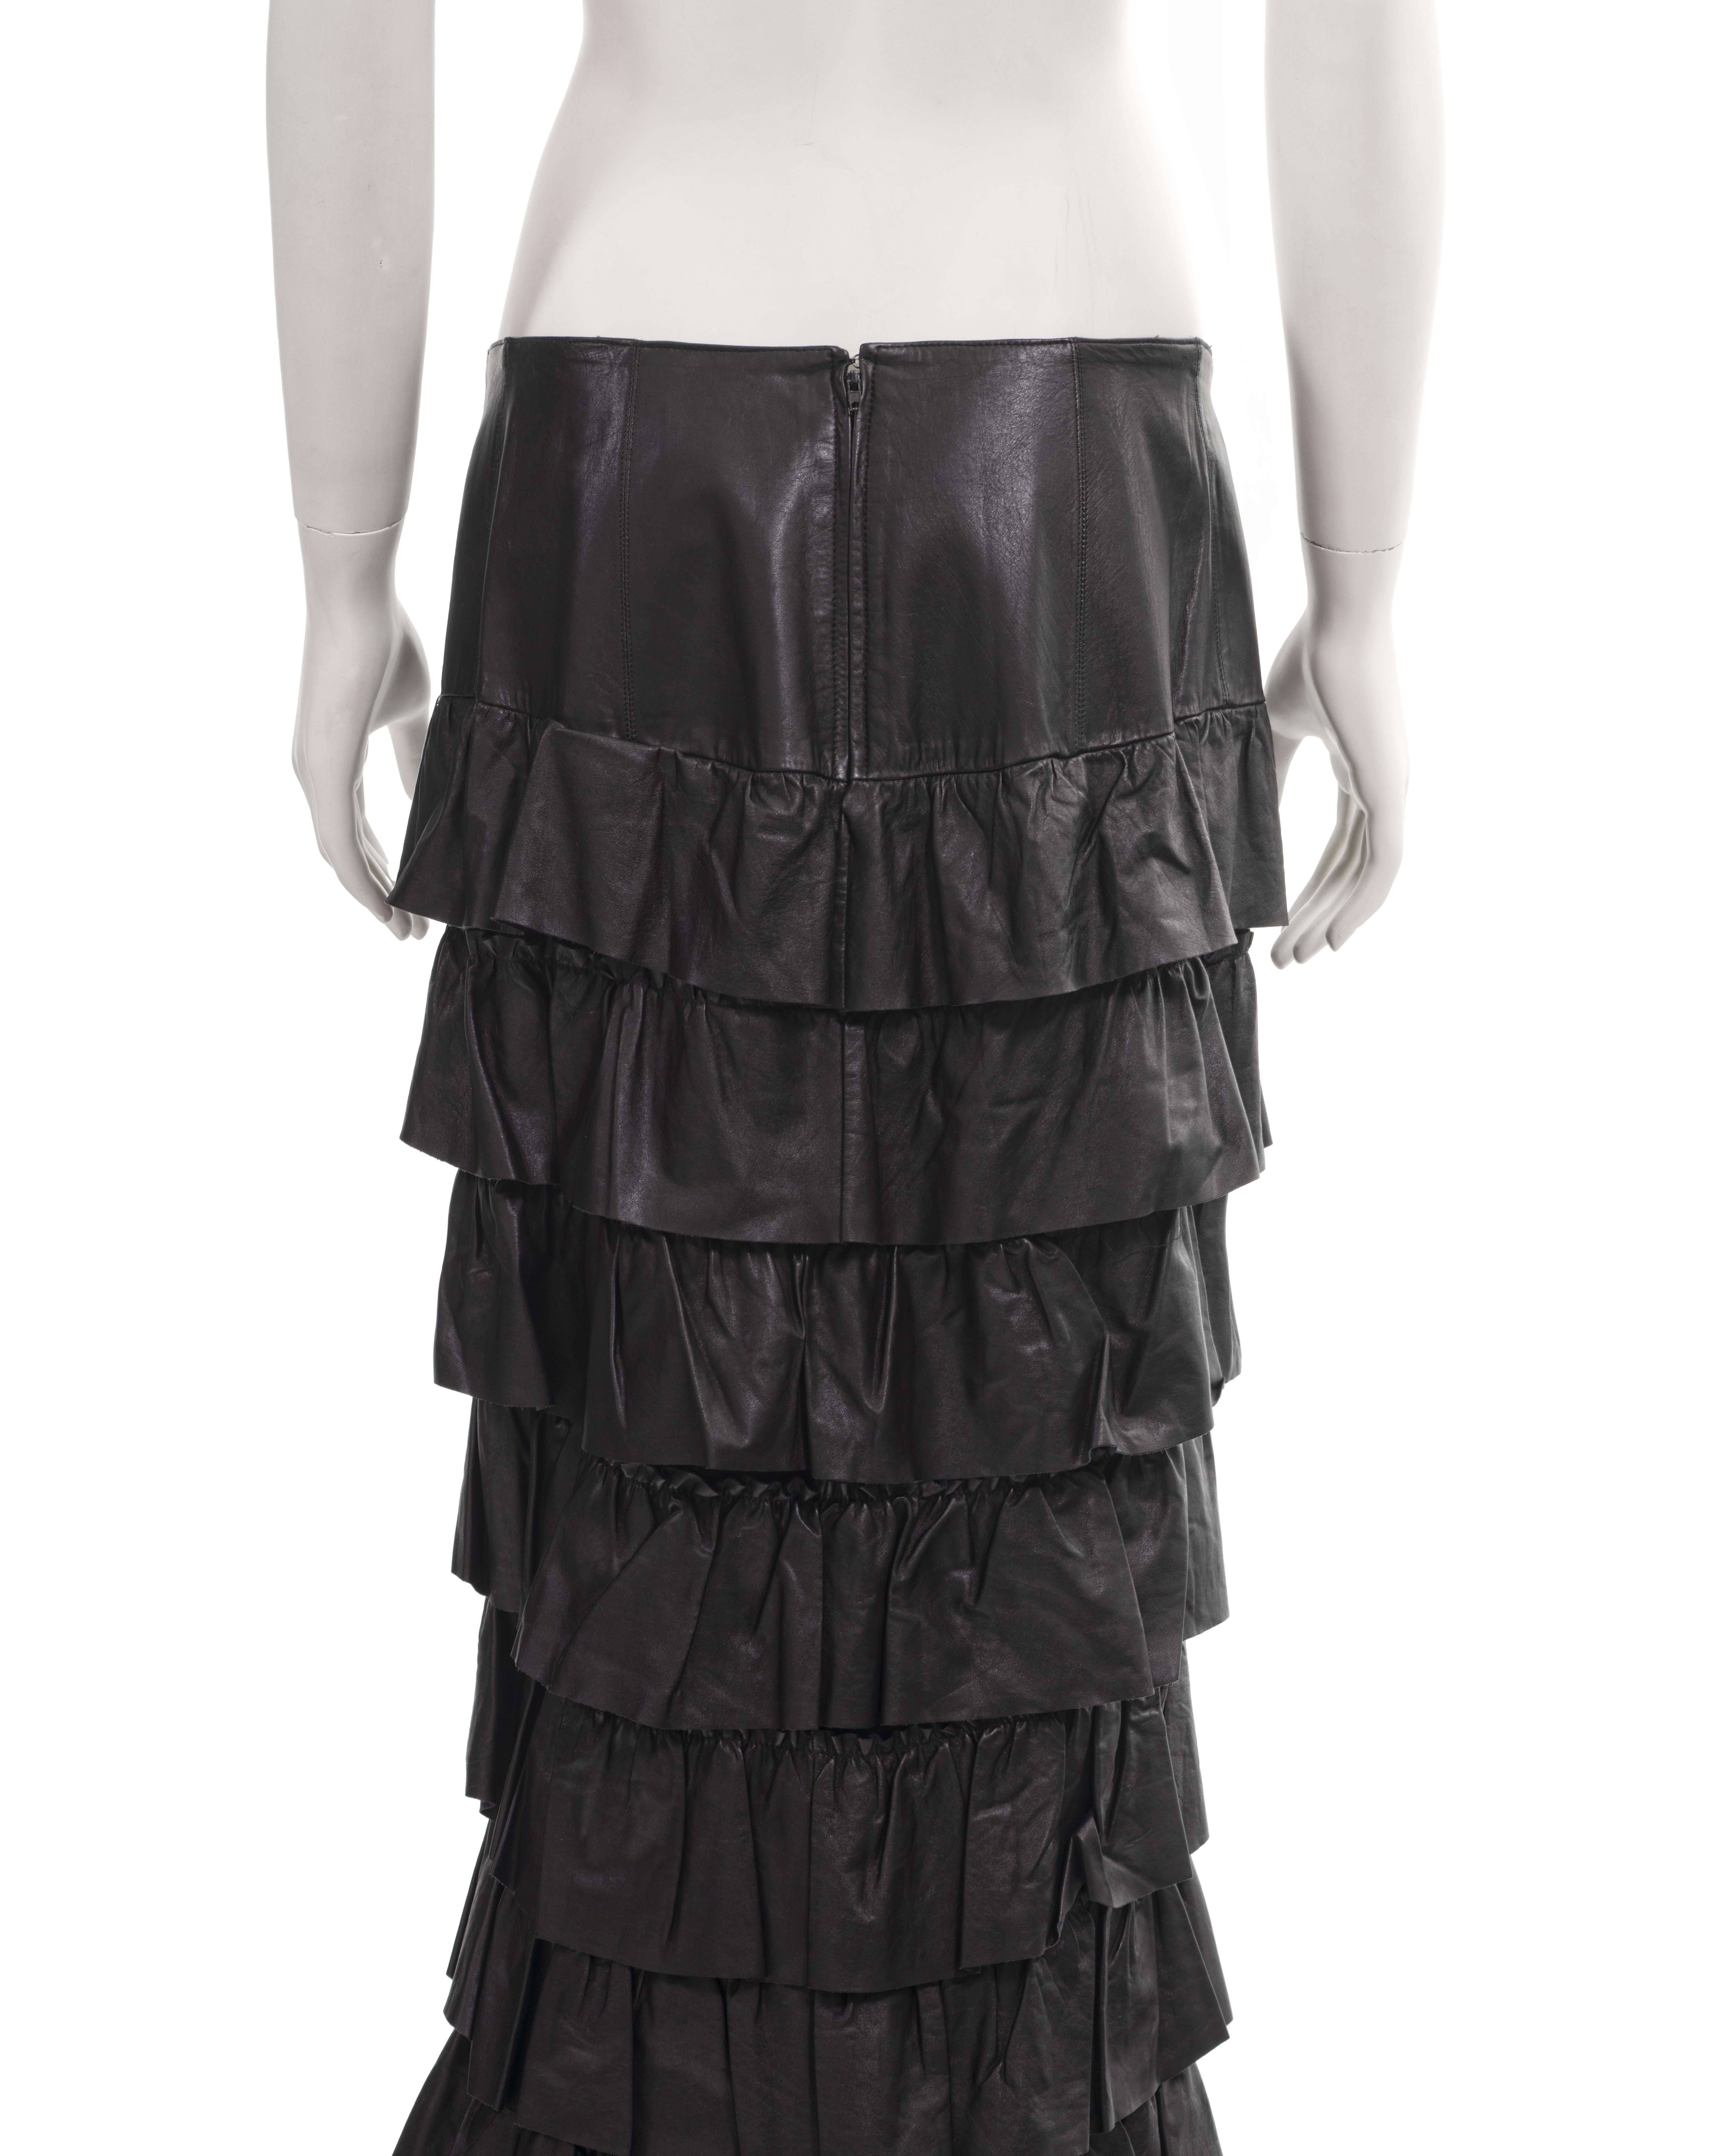 Chanel by Karl Lagerfeld black leather tiered ruffled maxi skirt, fw 2001 5